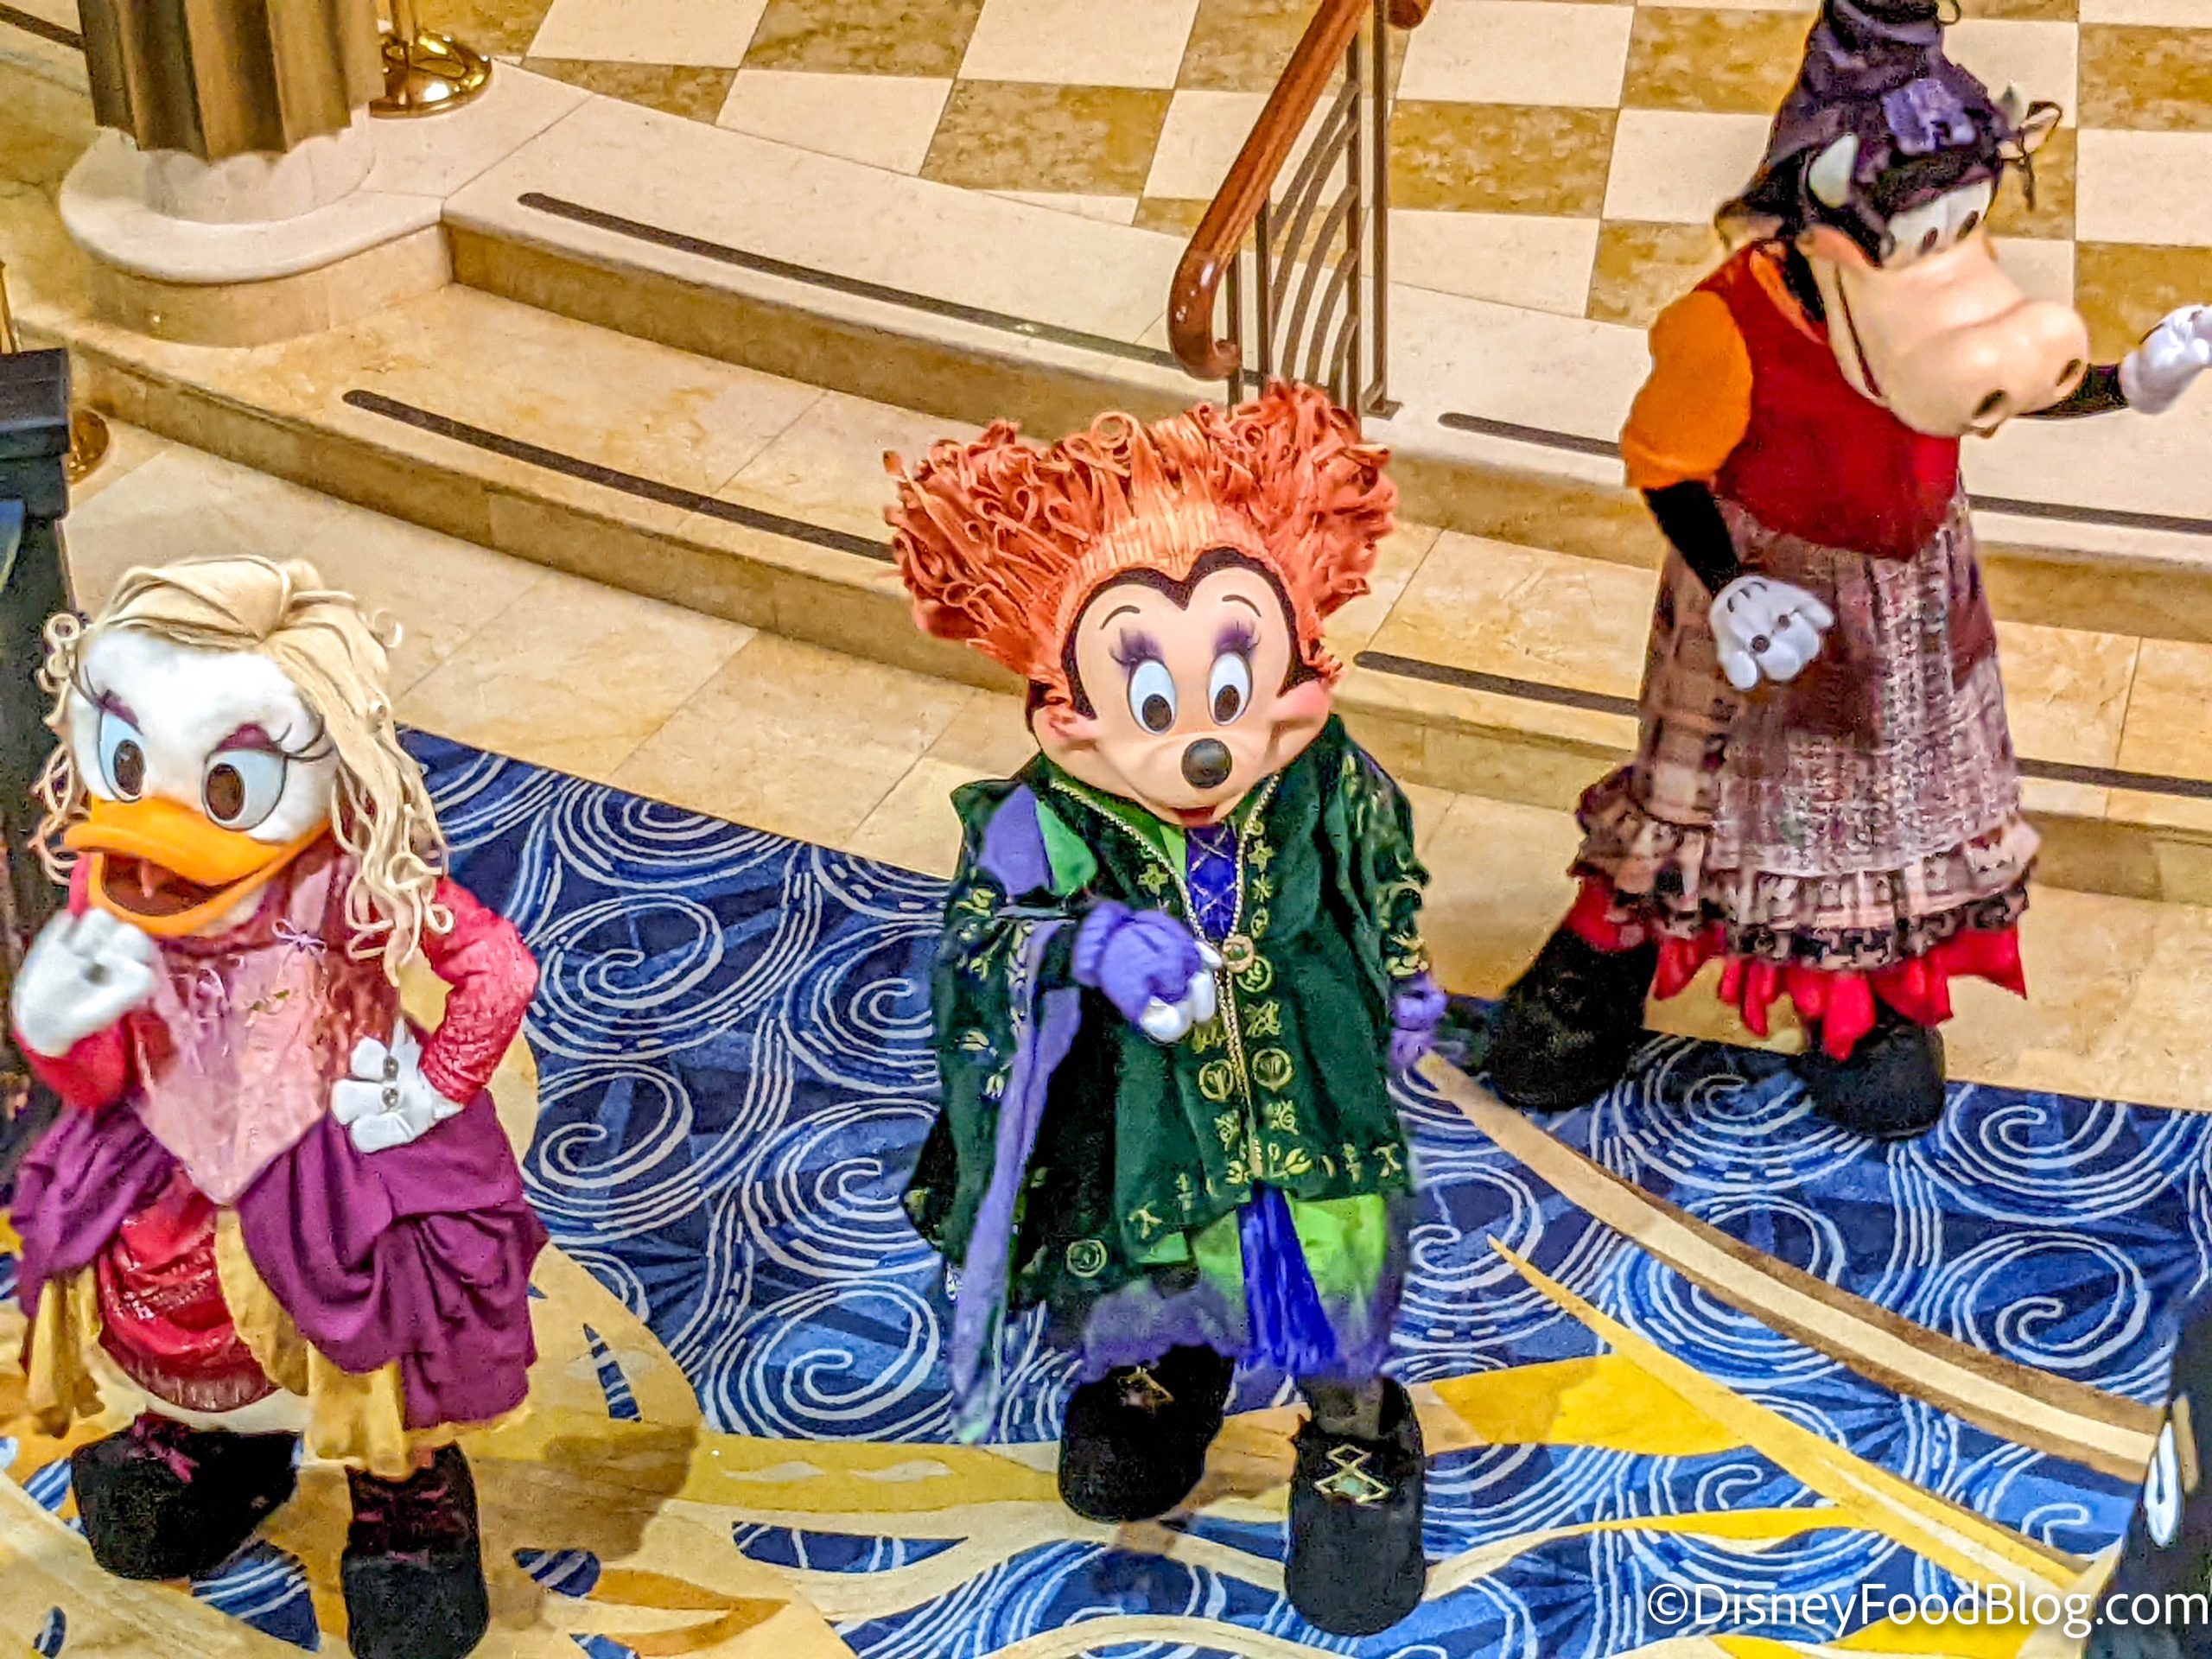 PHOTO: The Sanderson Sisters are Coming to Disney Cruise Line in